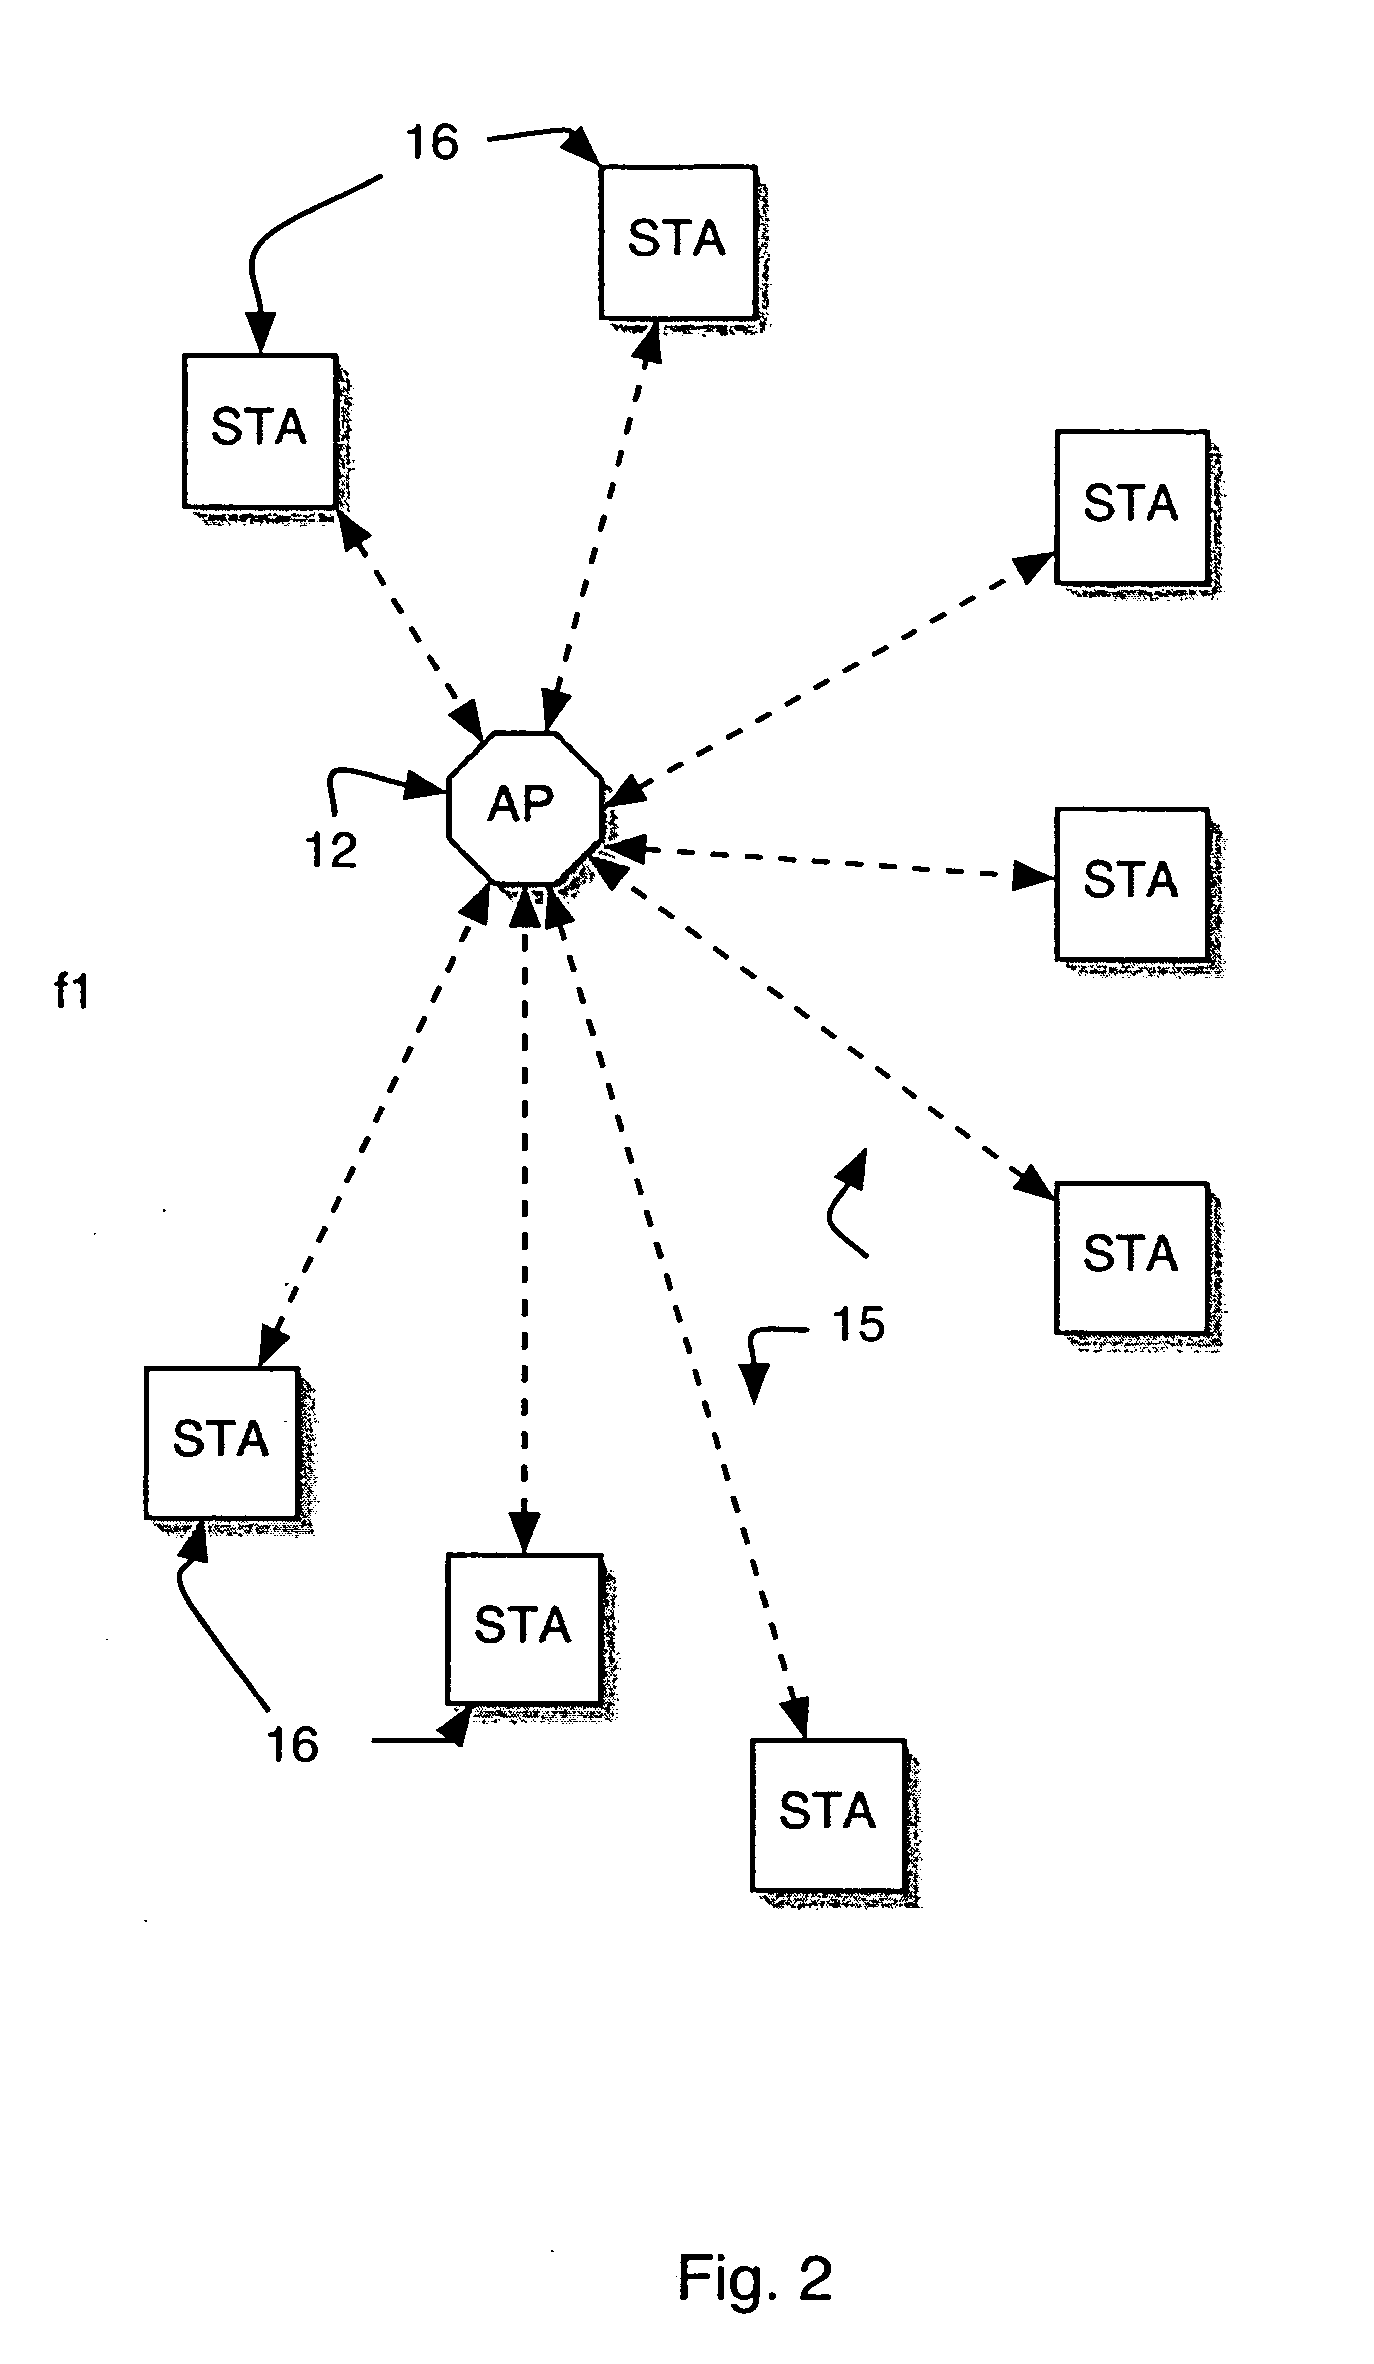 Distance determination apparatus for use by devices in a wireless network